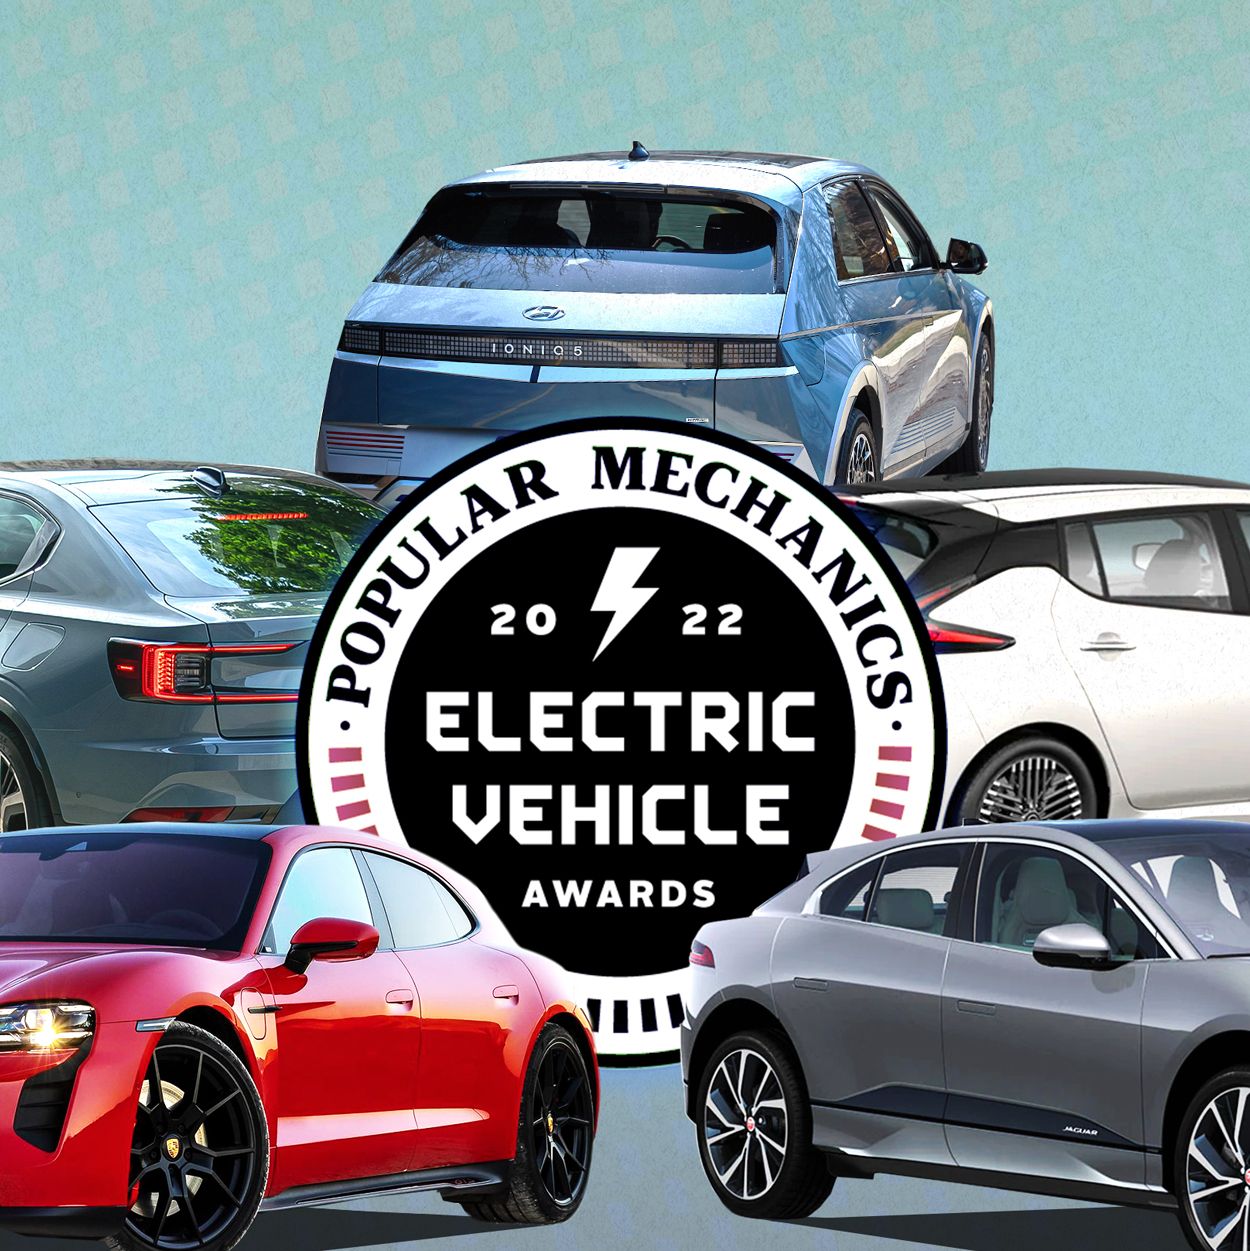 The Best Electric Vehicles of 2022